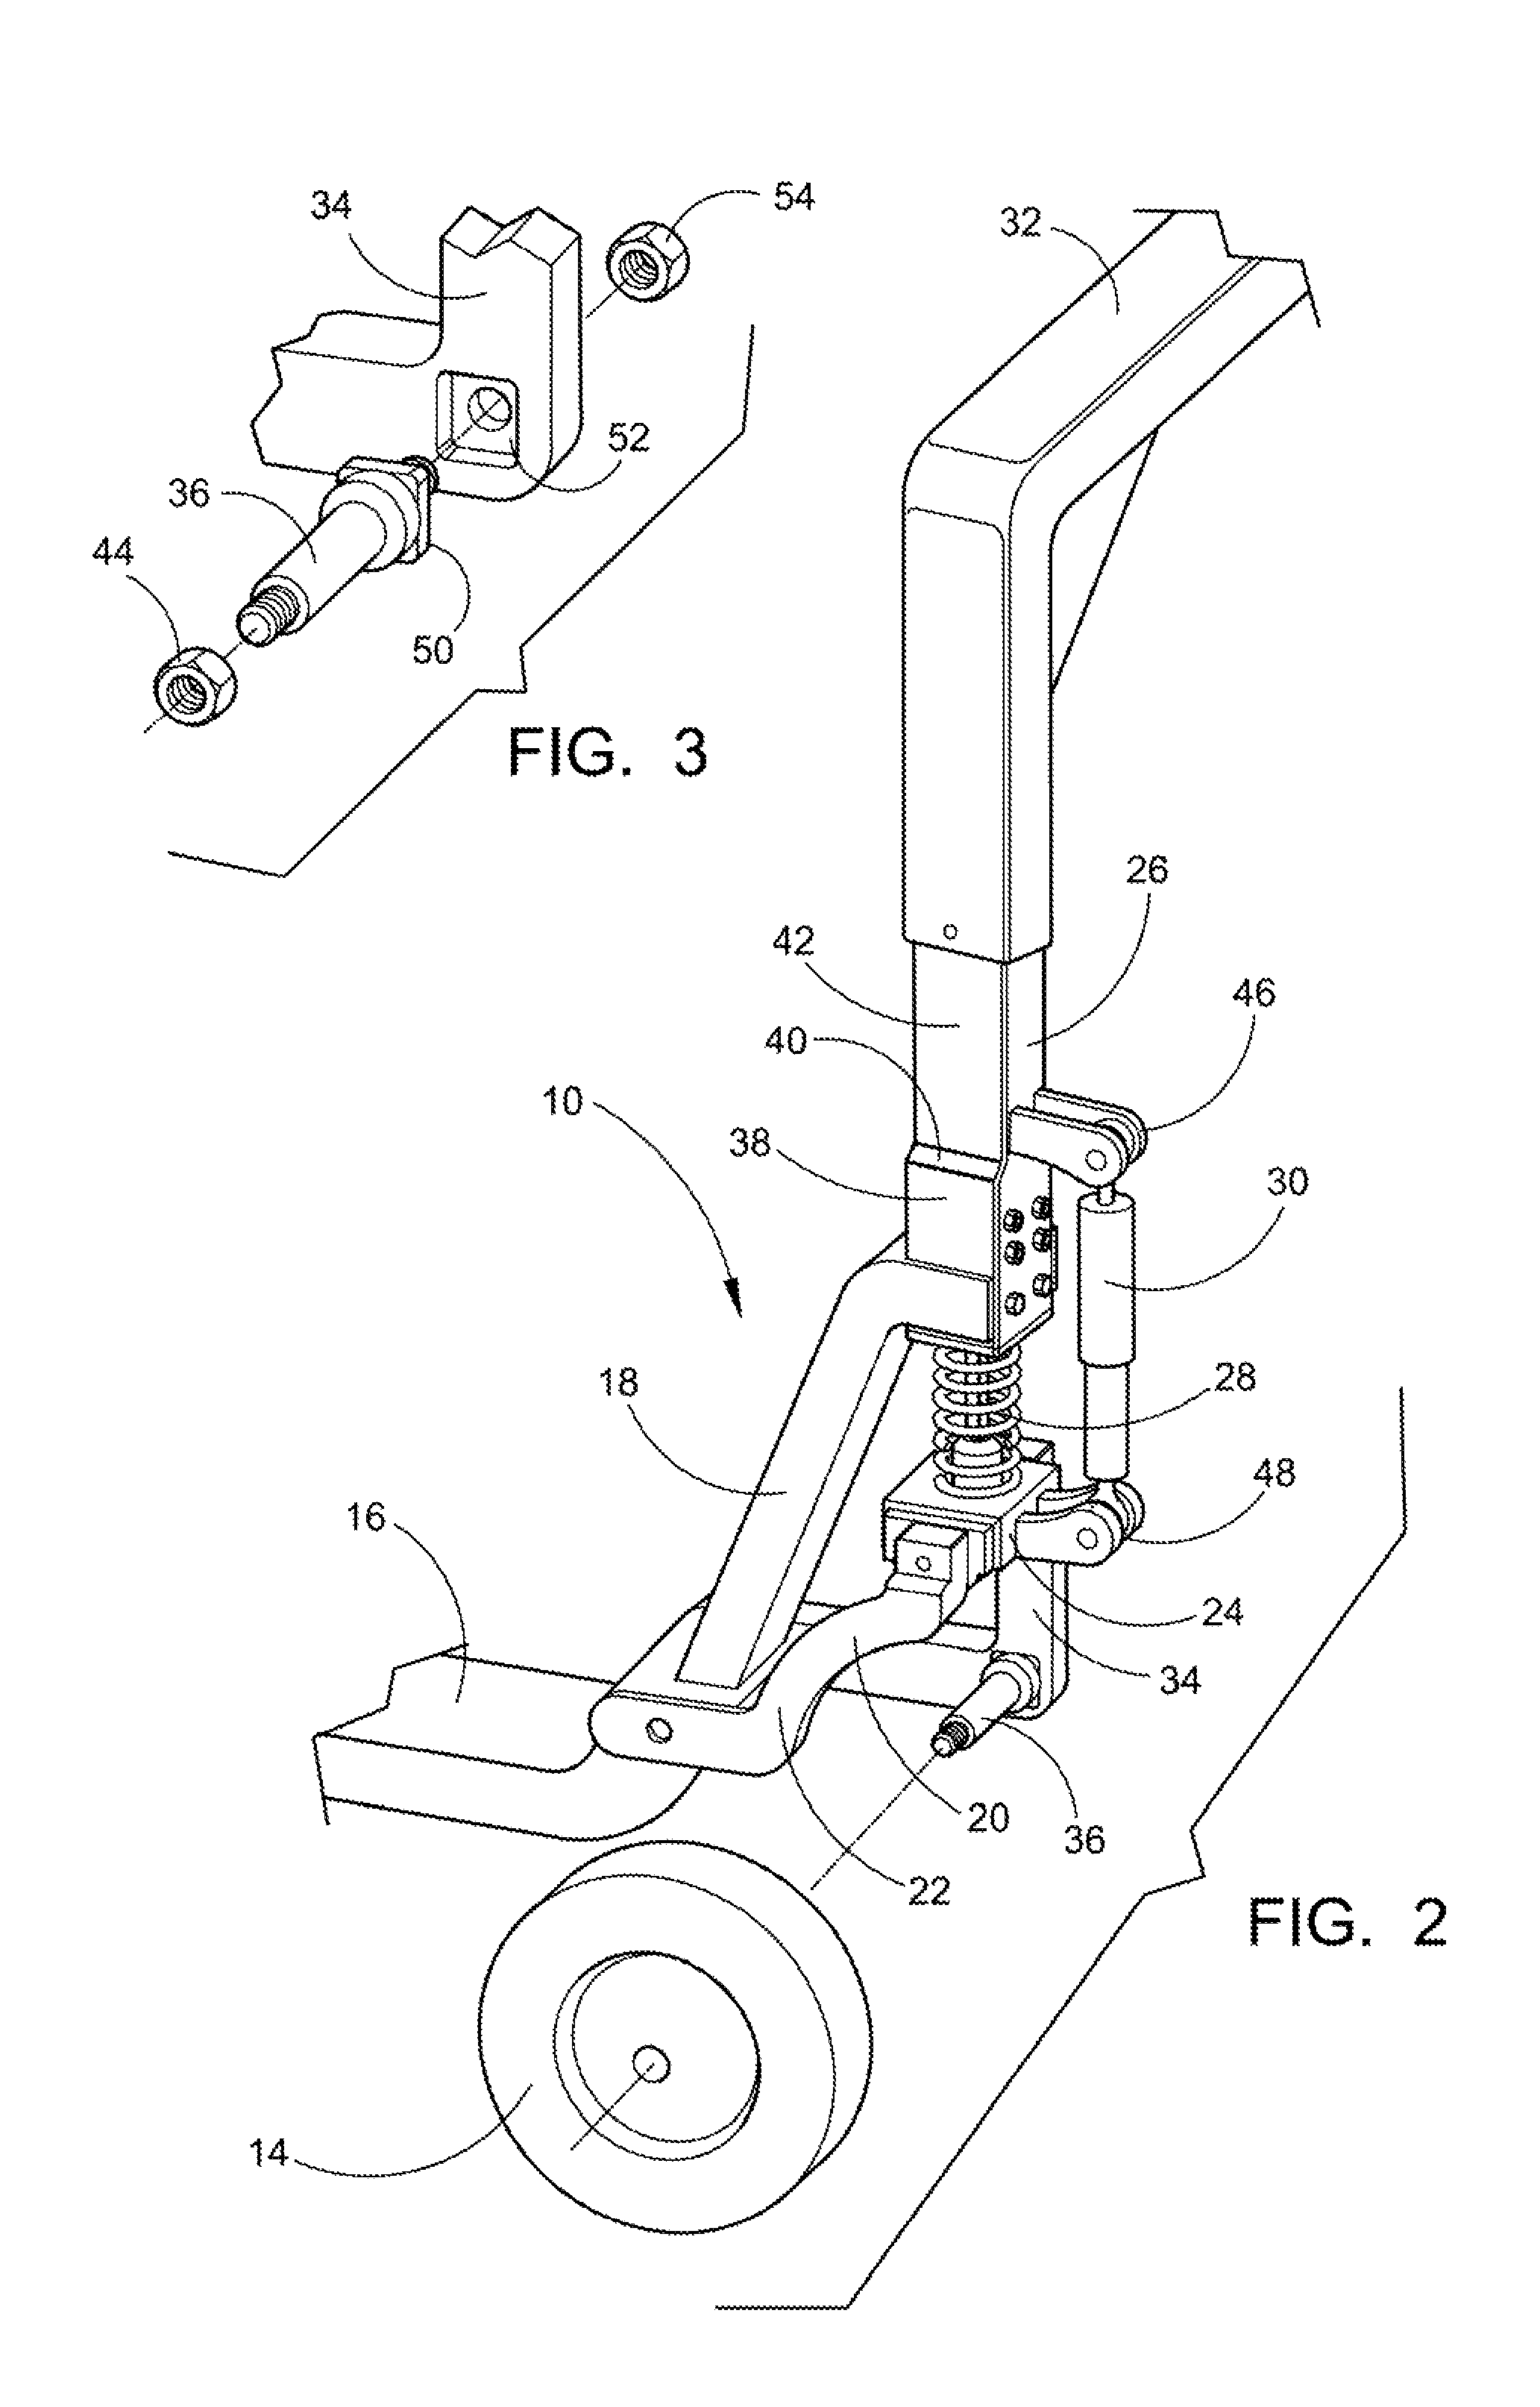 Raised axle and suspension system